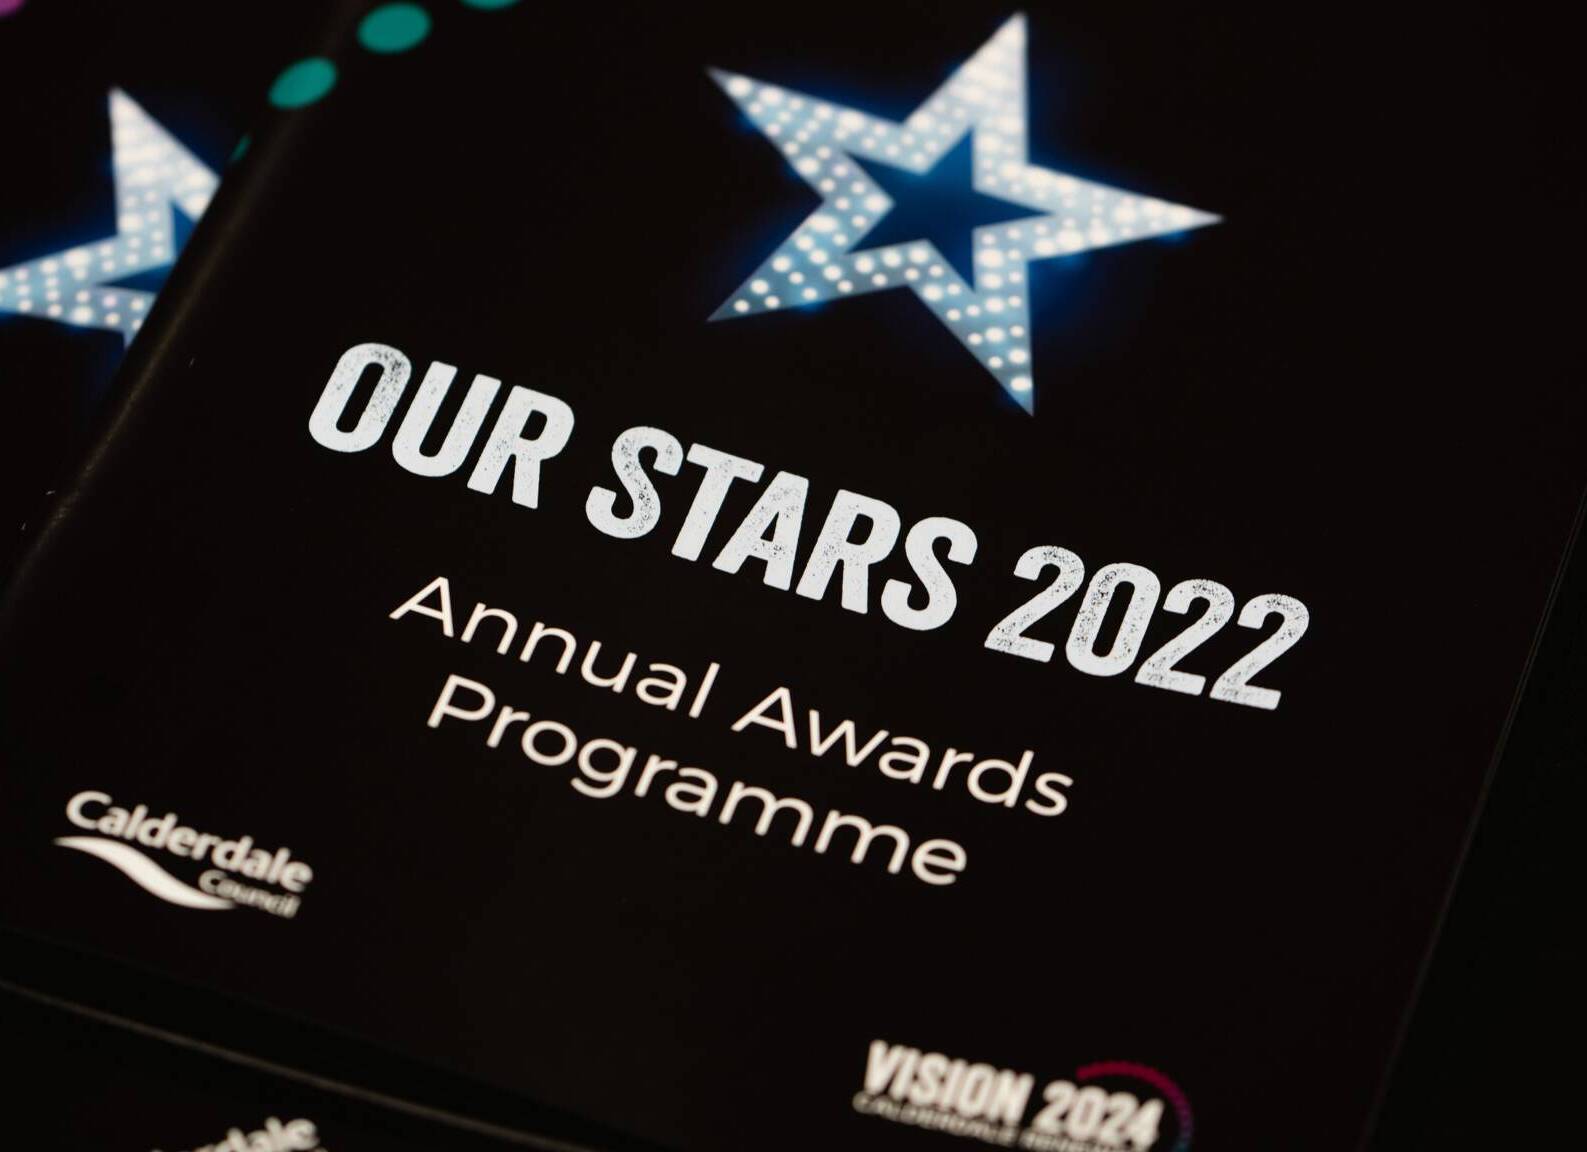 Our Stars Awards